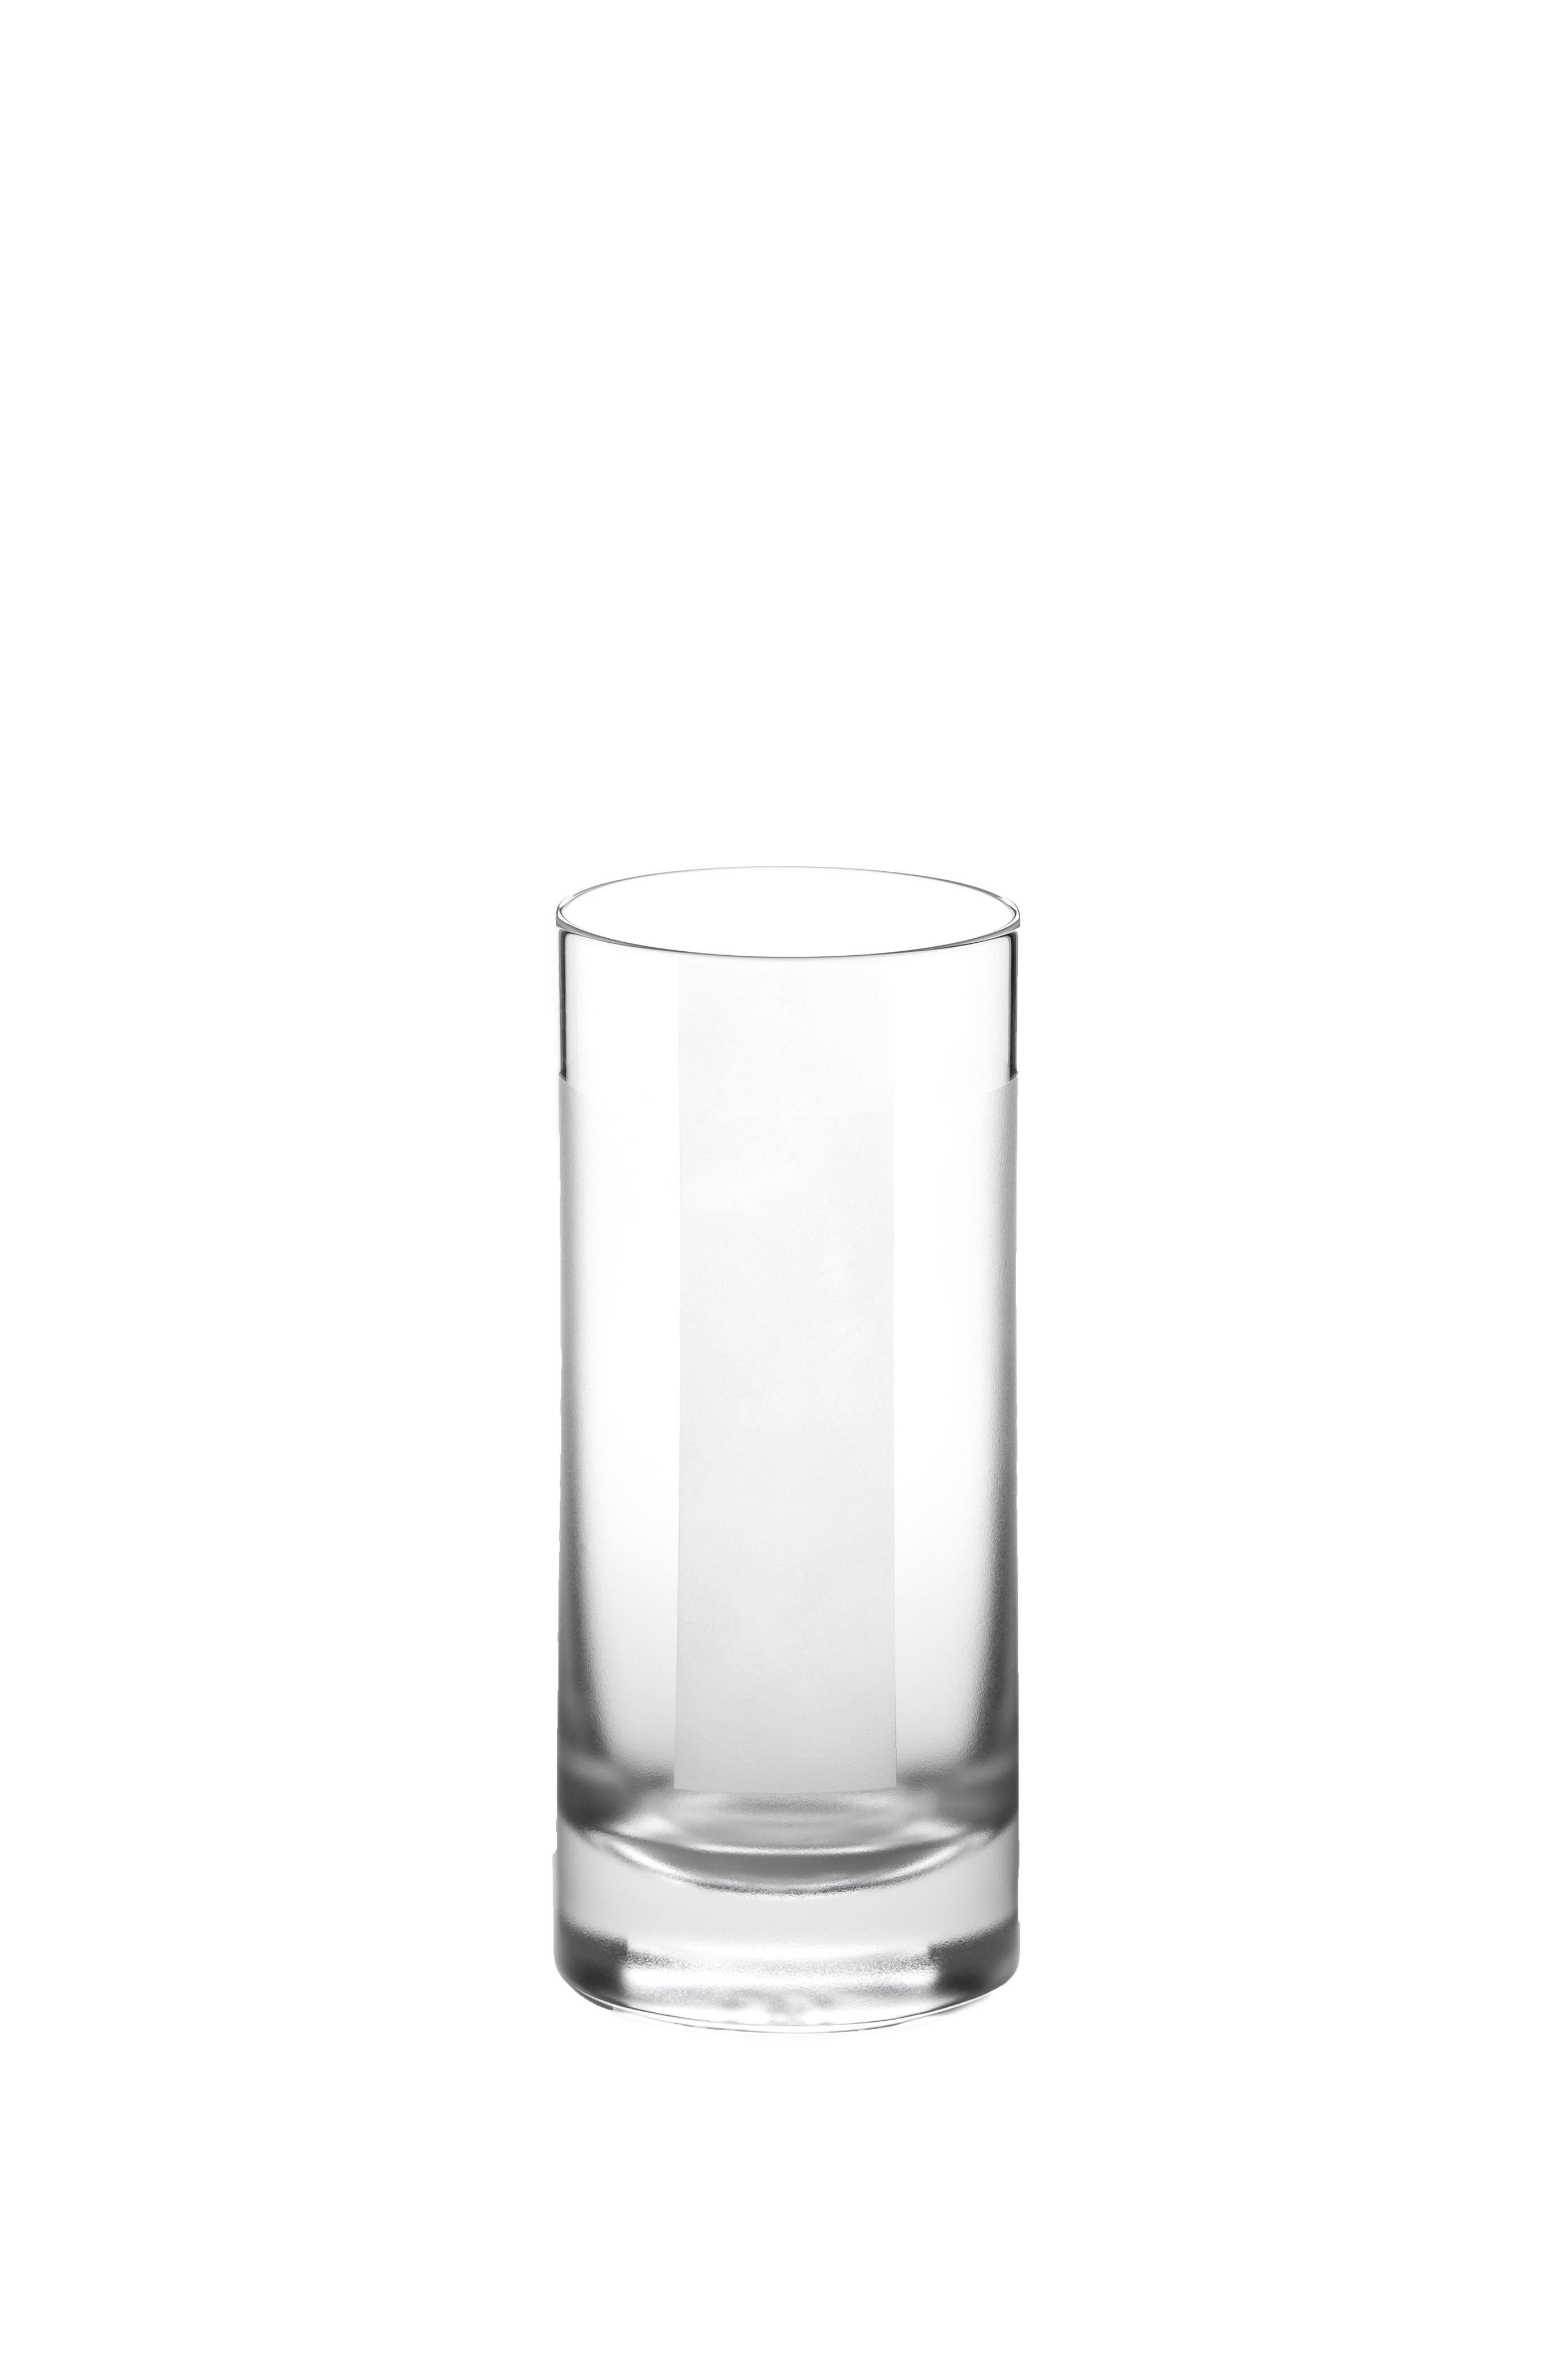 A high glass made by hand
A glass designed by Scholten & Baijings as part of our 'ELEMENTS' series.

The Collection: Elements
A rich canon of graphic markings defines the ELEMENTS series of lead crystal. Cuts and textures of varying depth and